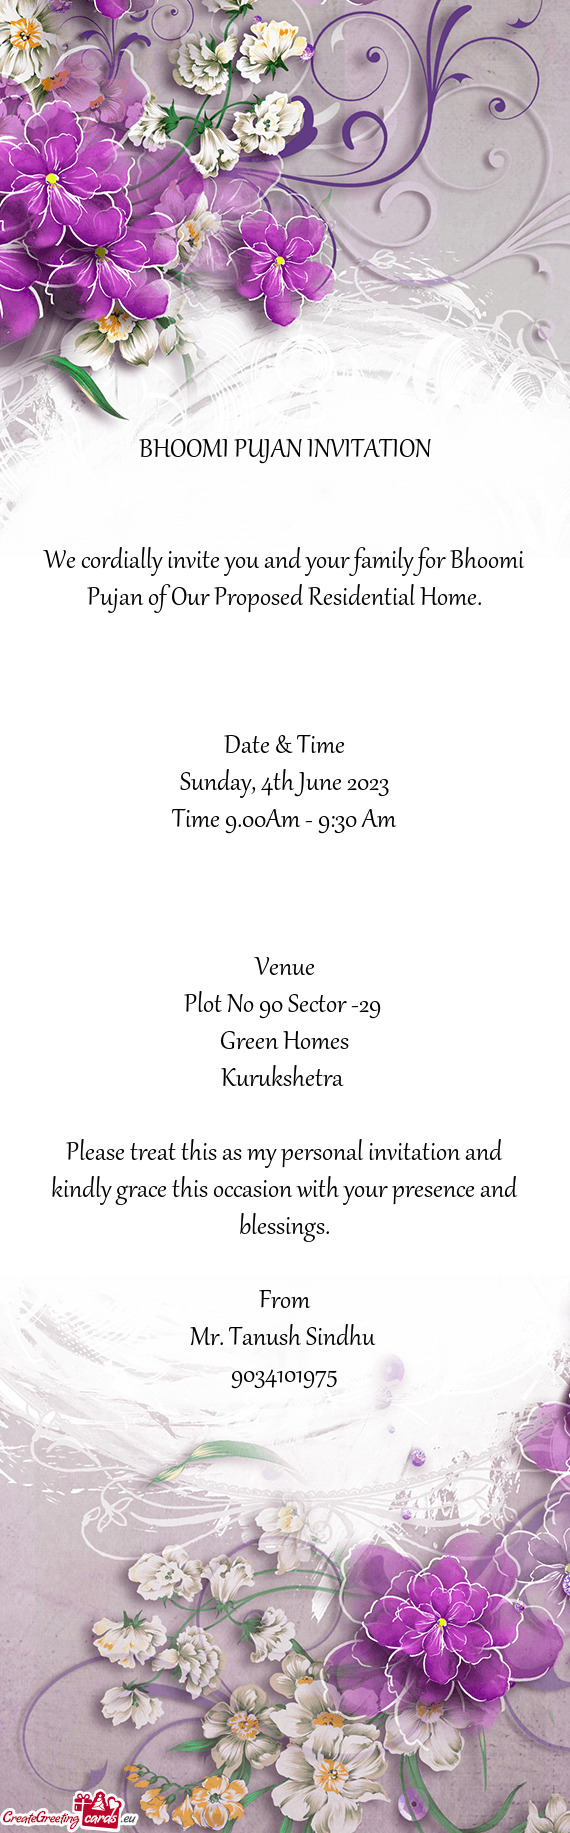 We cordially invite you and your family for Bhoomi Pujan of Our Proposed Residential Home